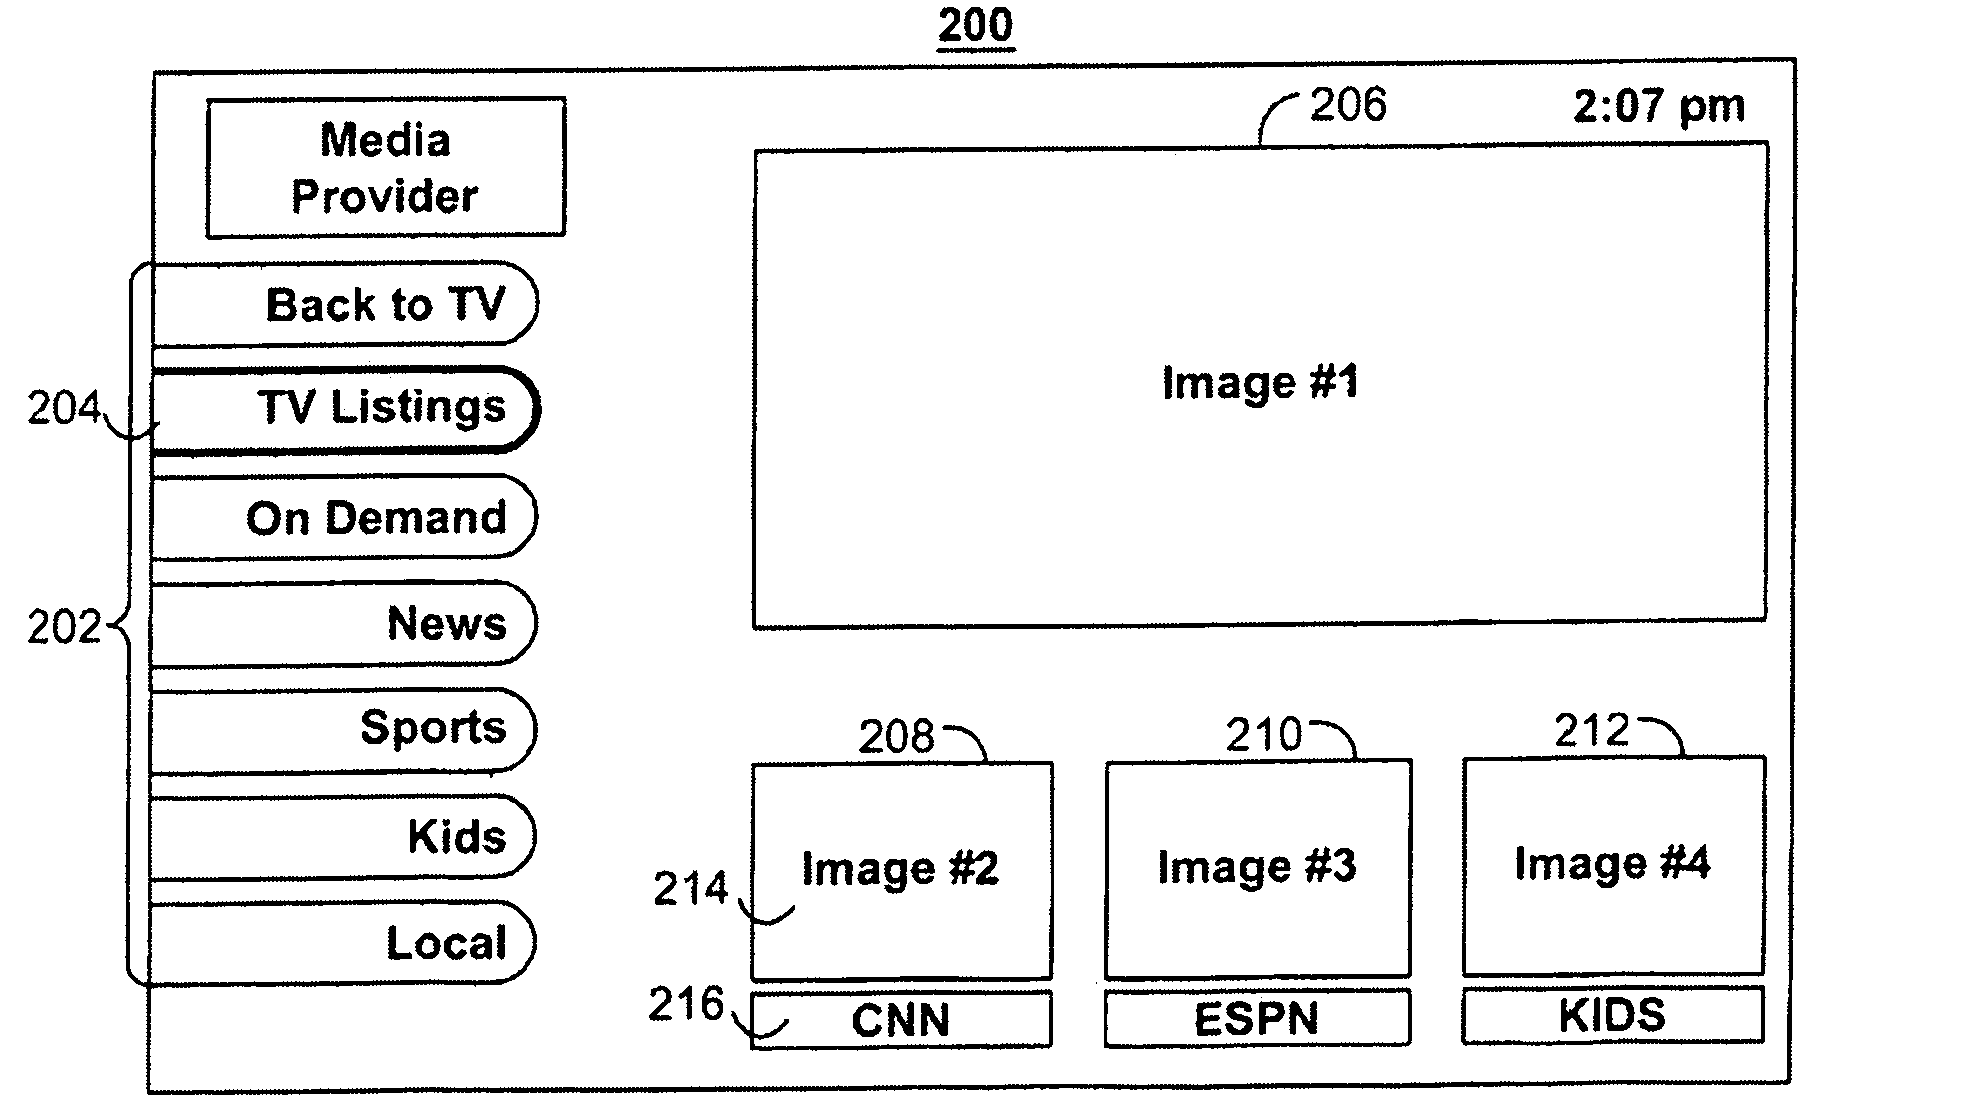 Systems and methods for displaying media content and media guidance information